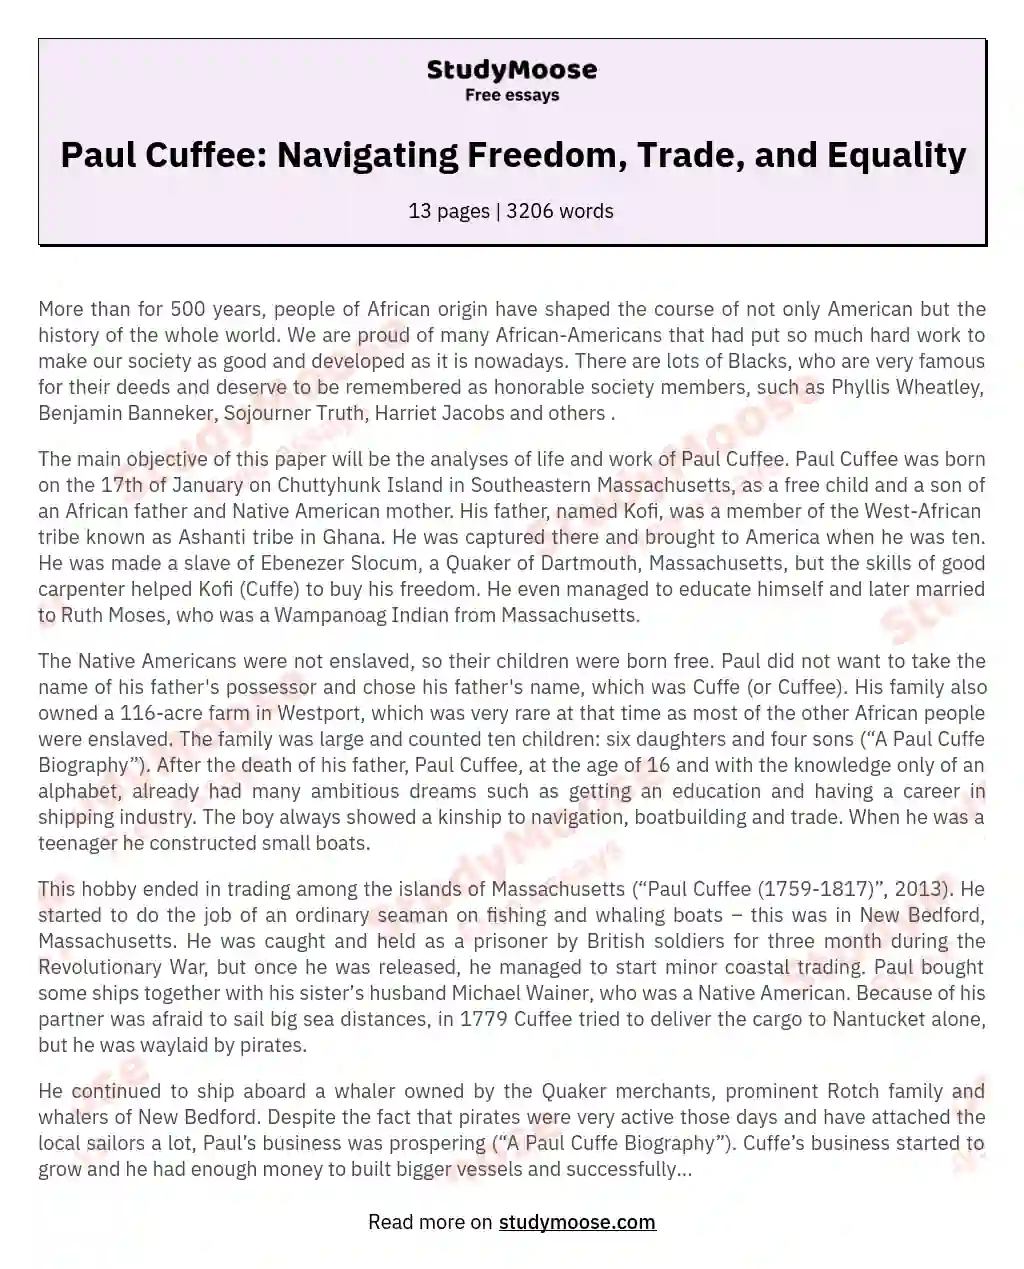 Paul Cuffee: Navigating Freedom, Trade, and Equality essay